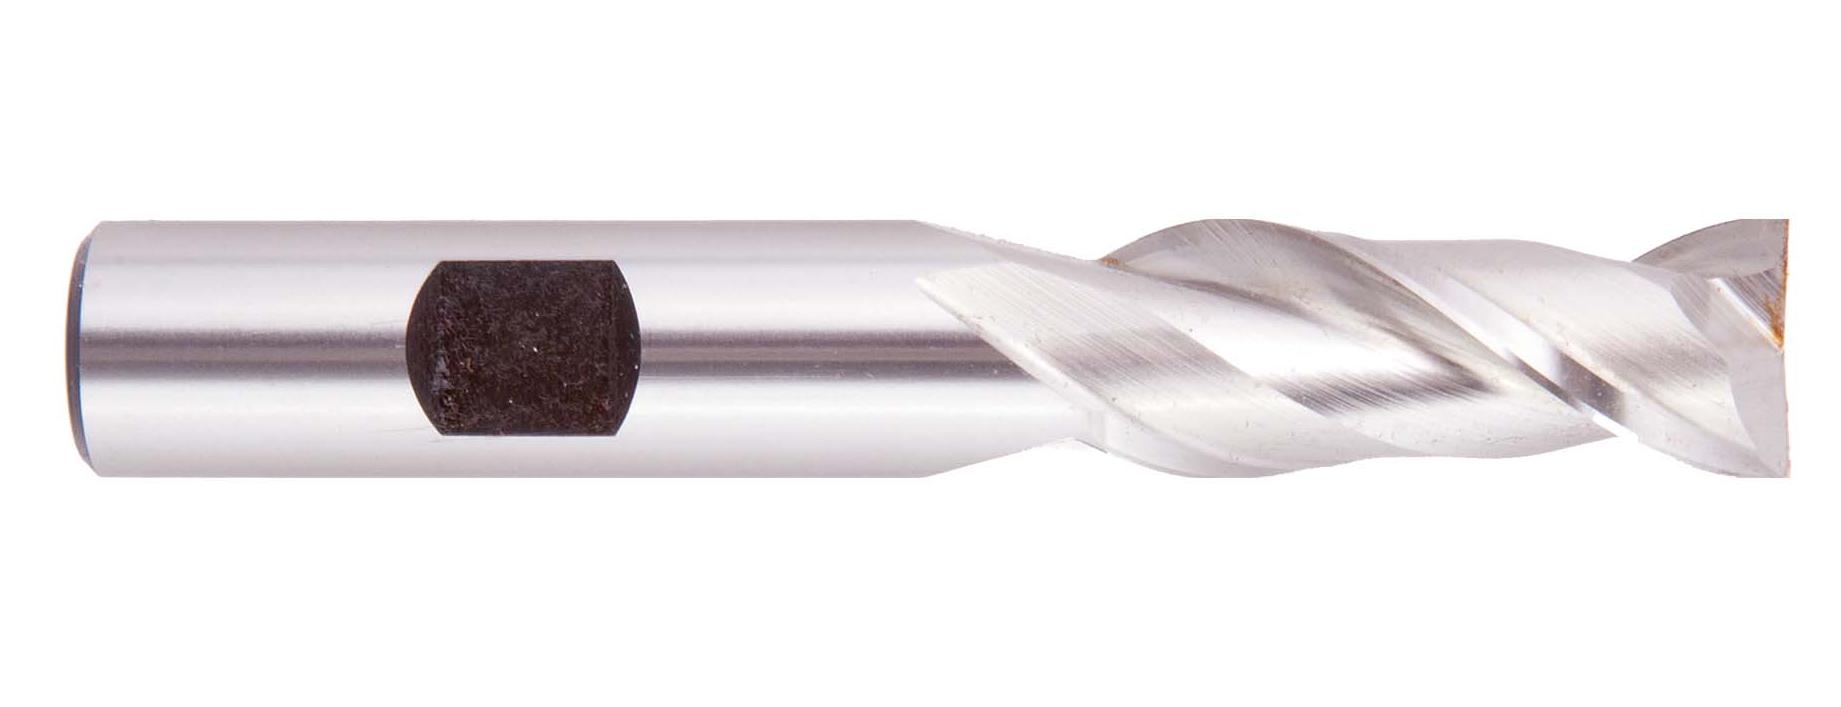 Up to 3 New Regal 3mm 2 Flute HSS End Mill 55024